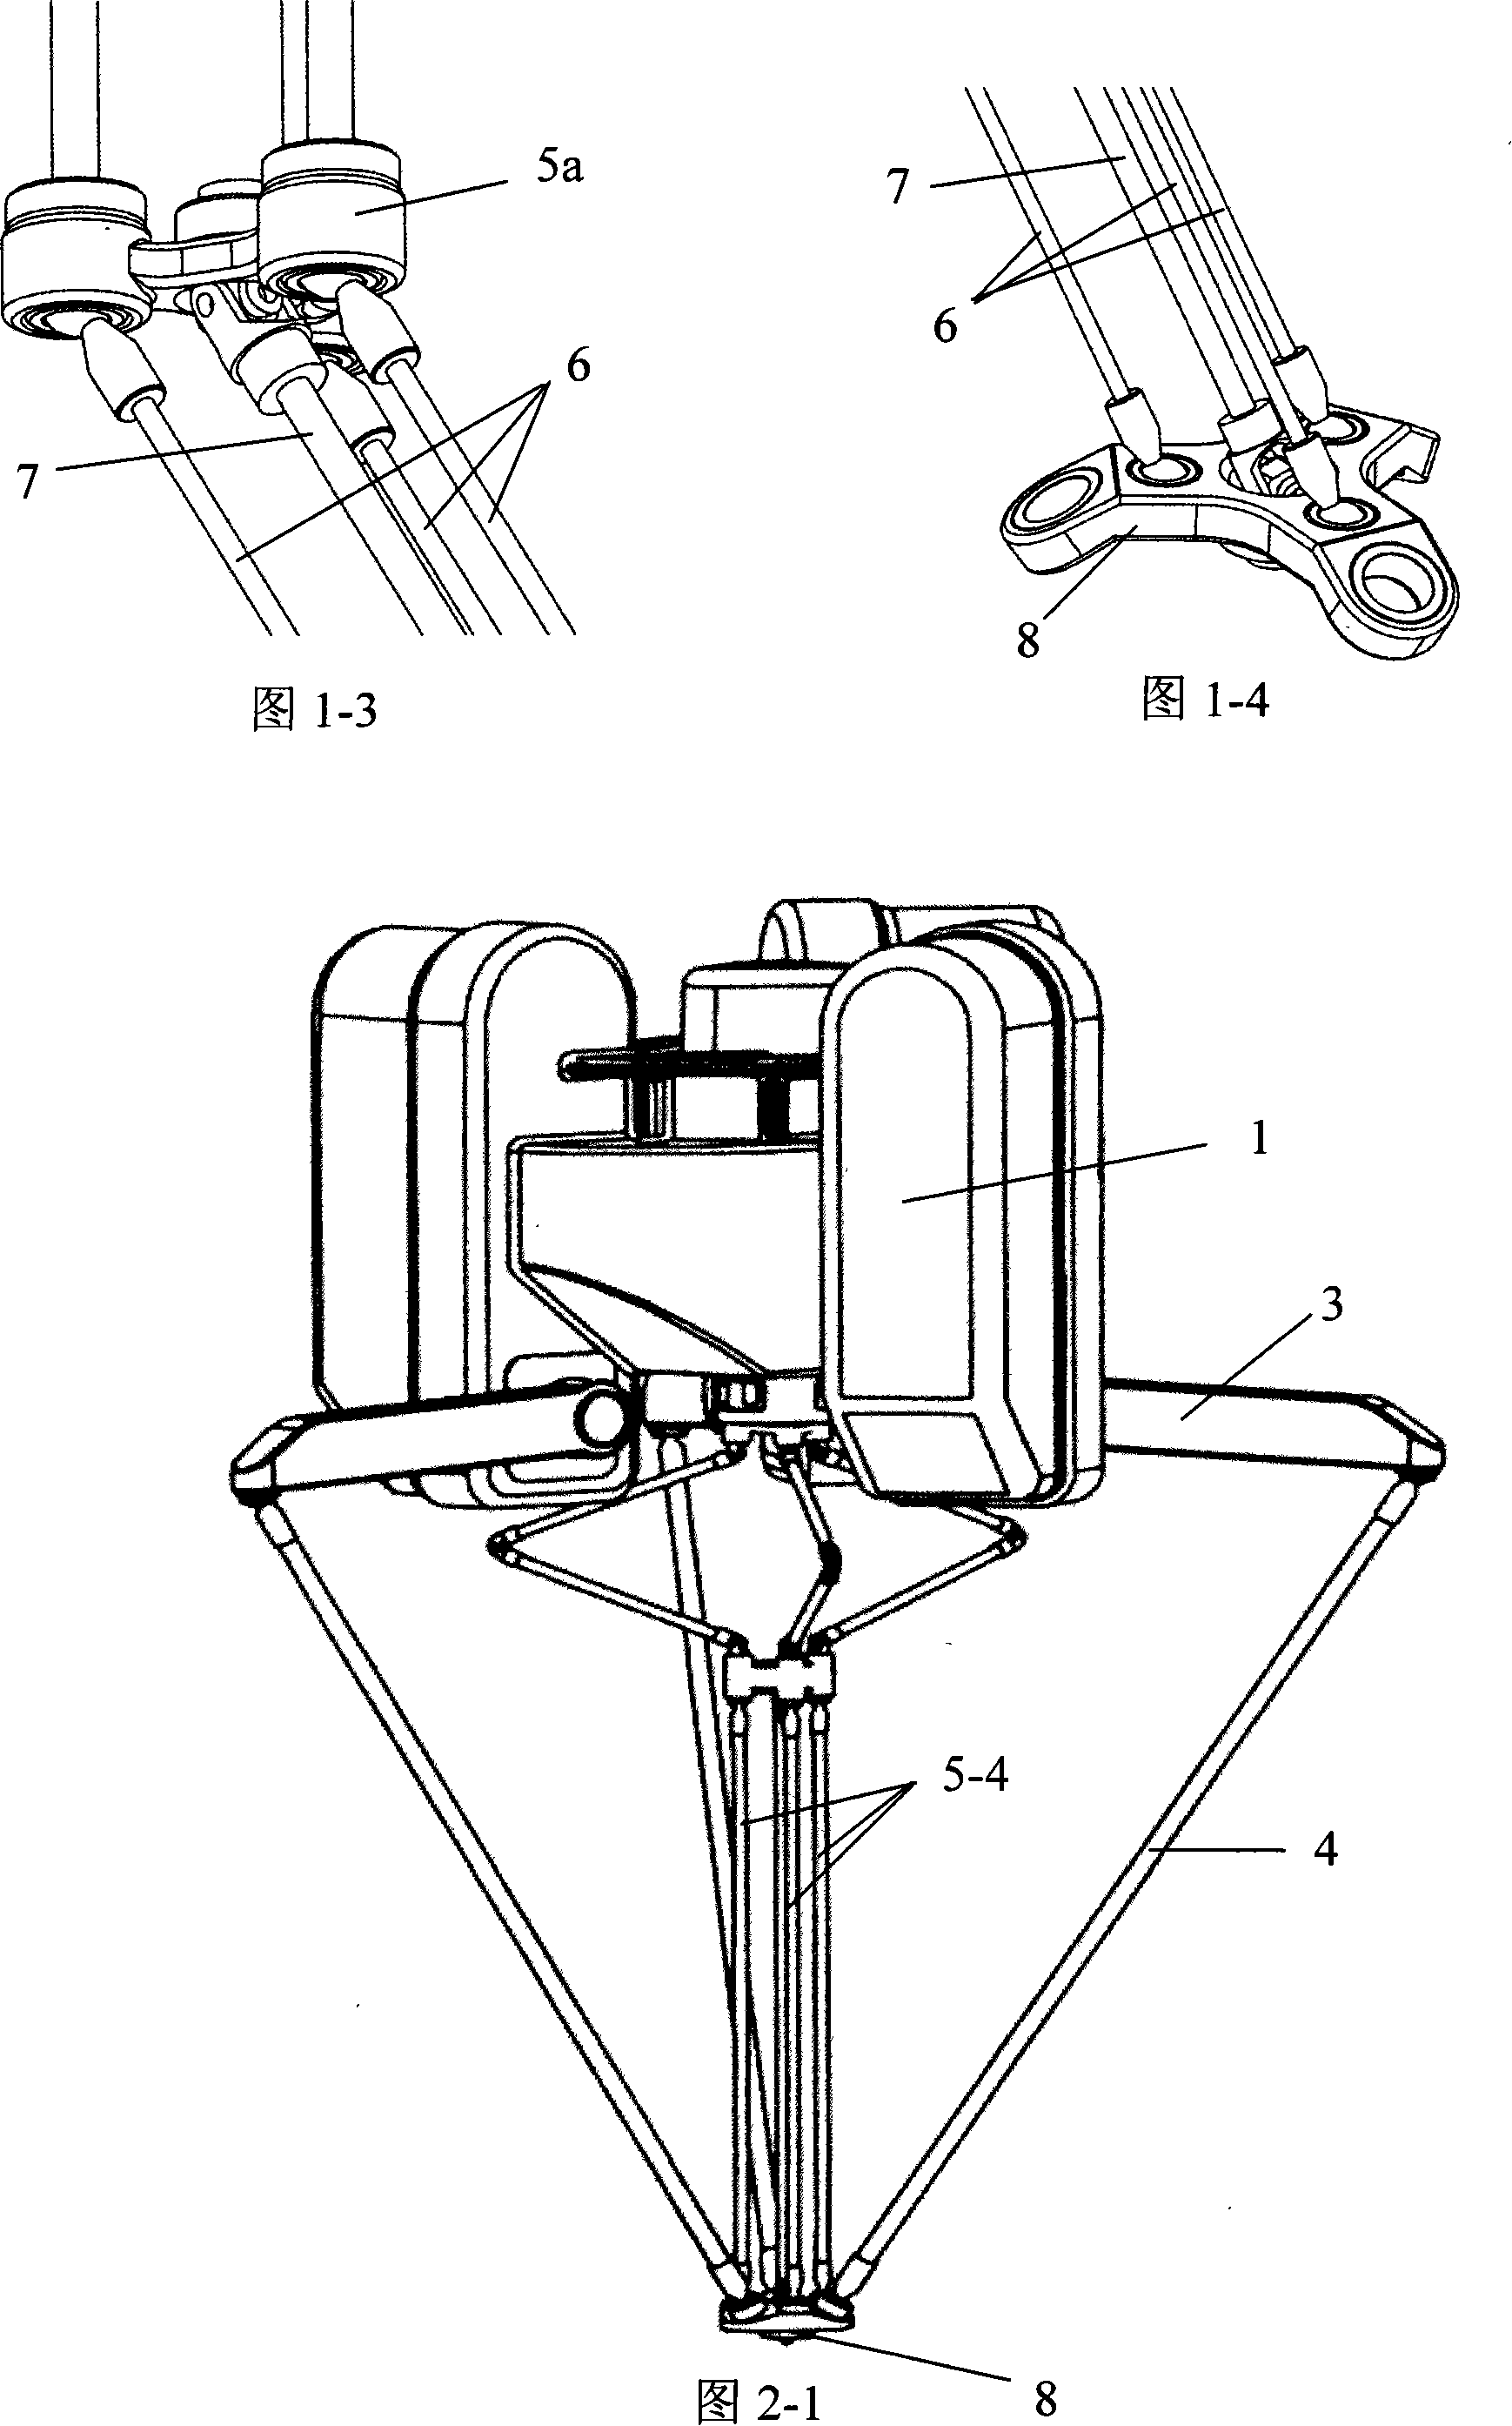 Space three-translational parallel connection mechanism with far-rack single-lever